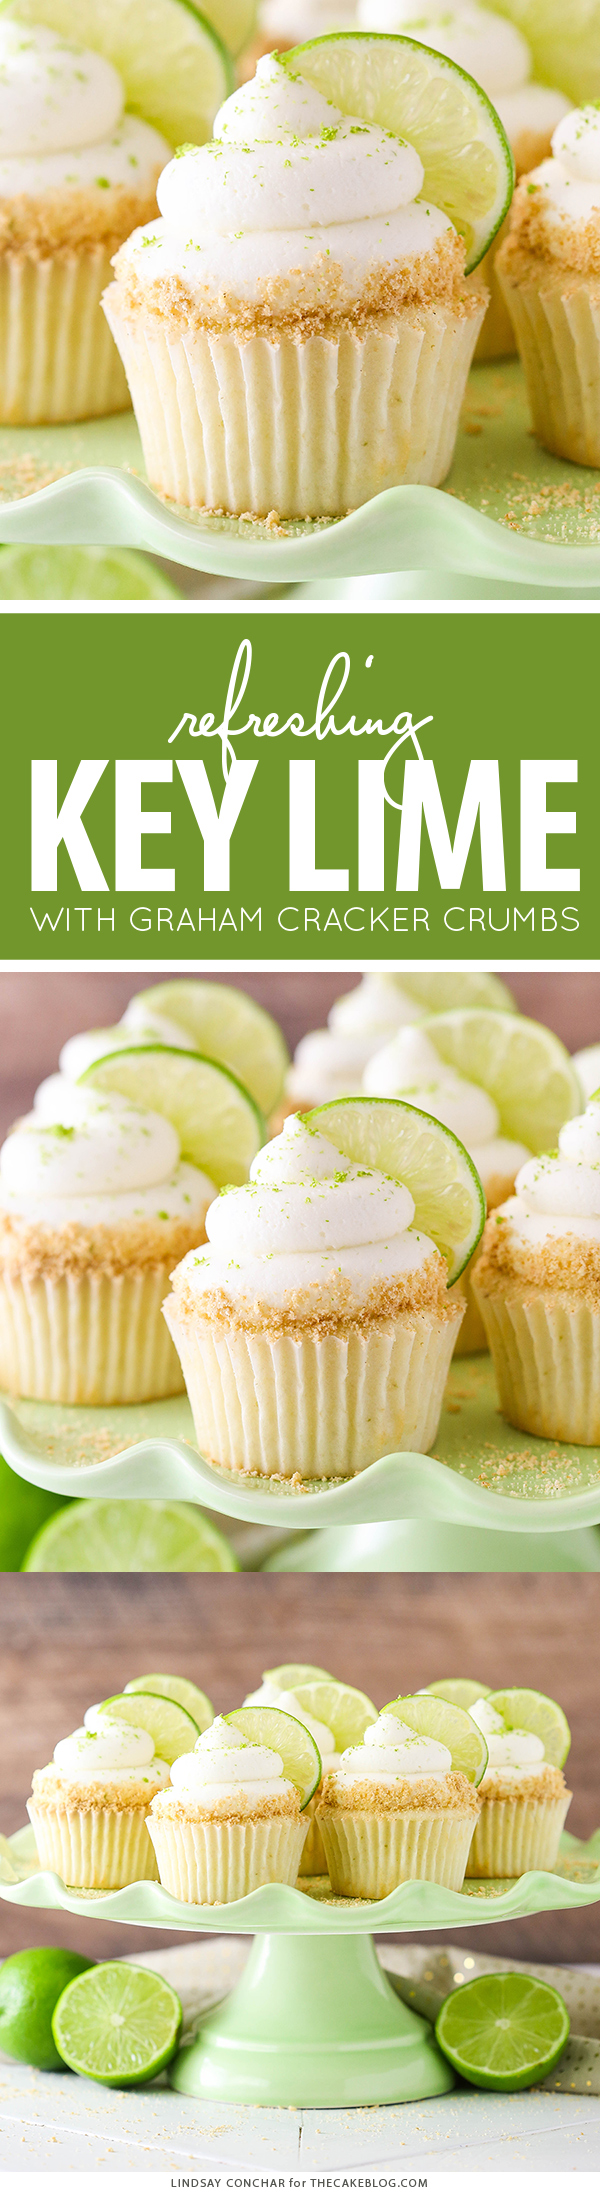 Key Lime Cupcakes - light, fluffy cupcakes full of key lime flavor! With lime juice and zest, topped with a tangy sweet lime frosting and graham cracker crumbs | by Lindsay Conchar for TheCakeBlog.com